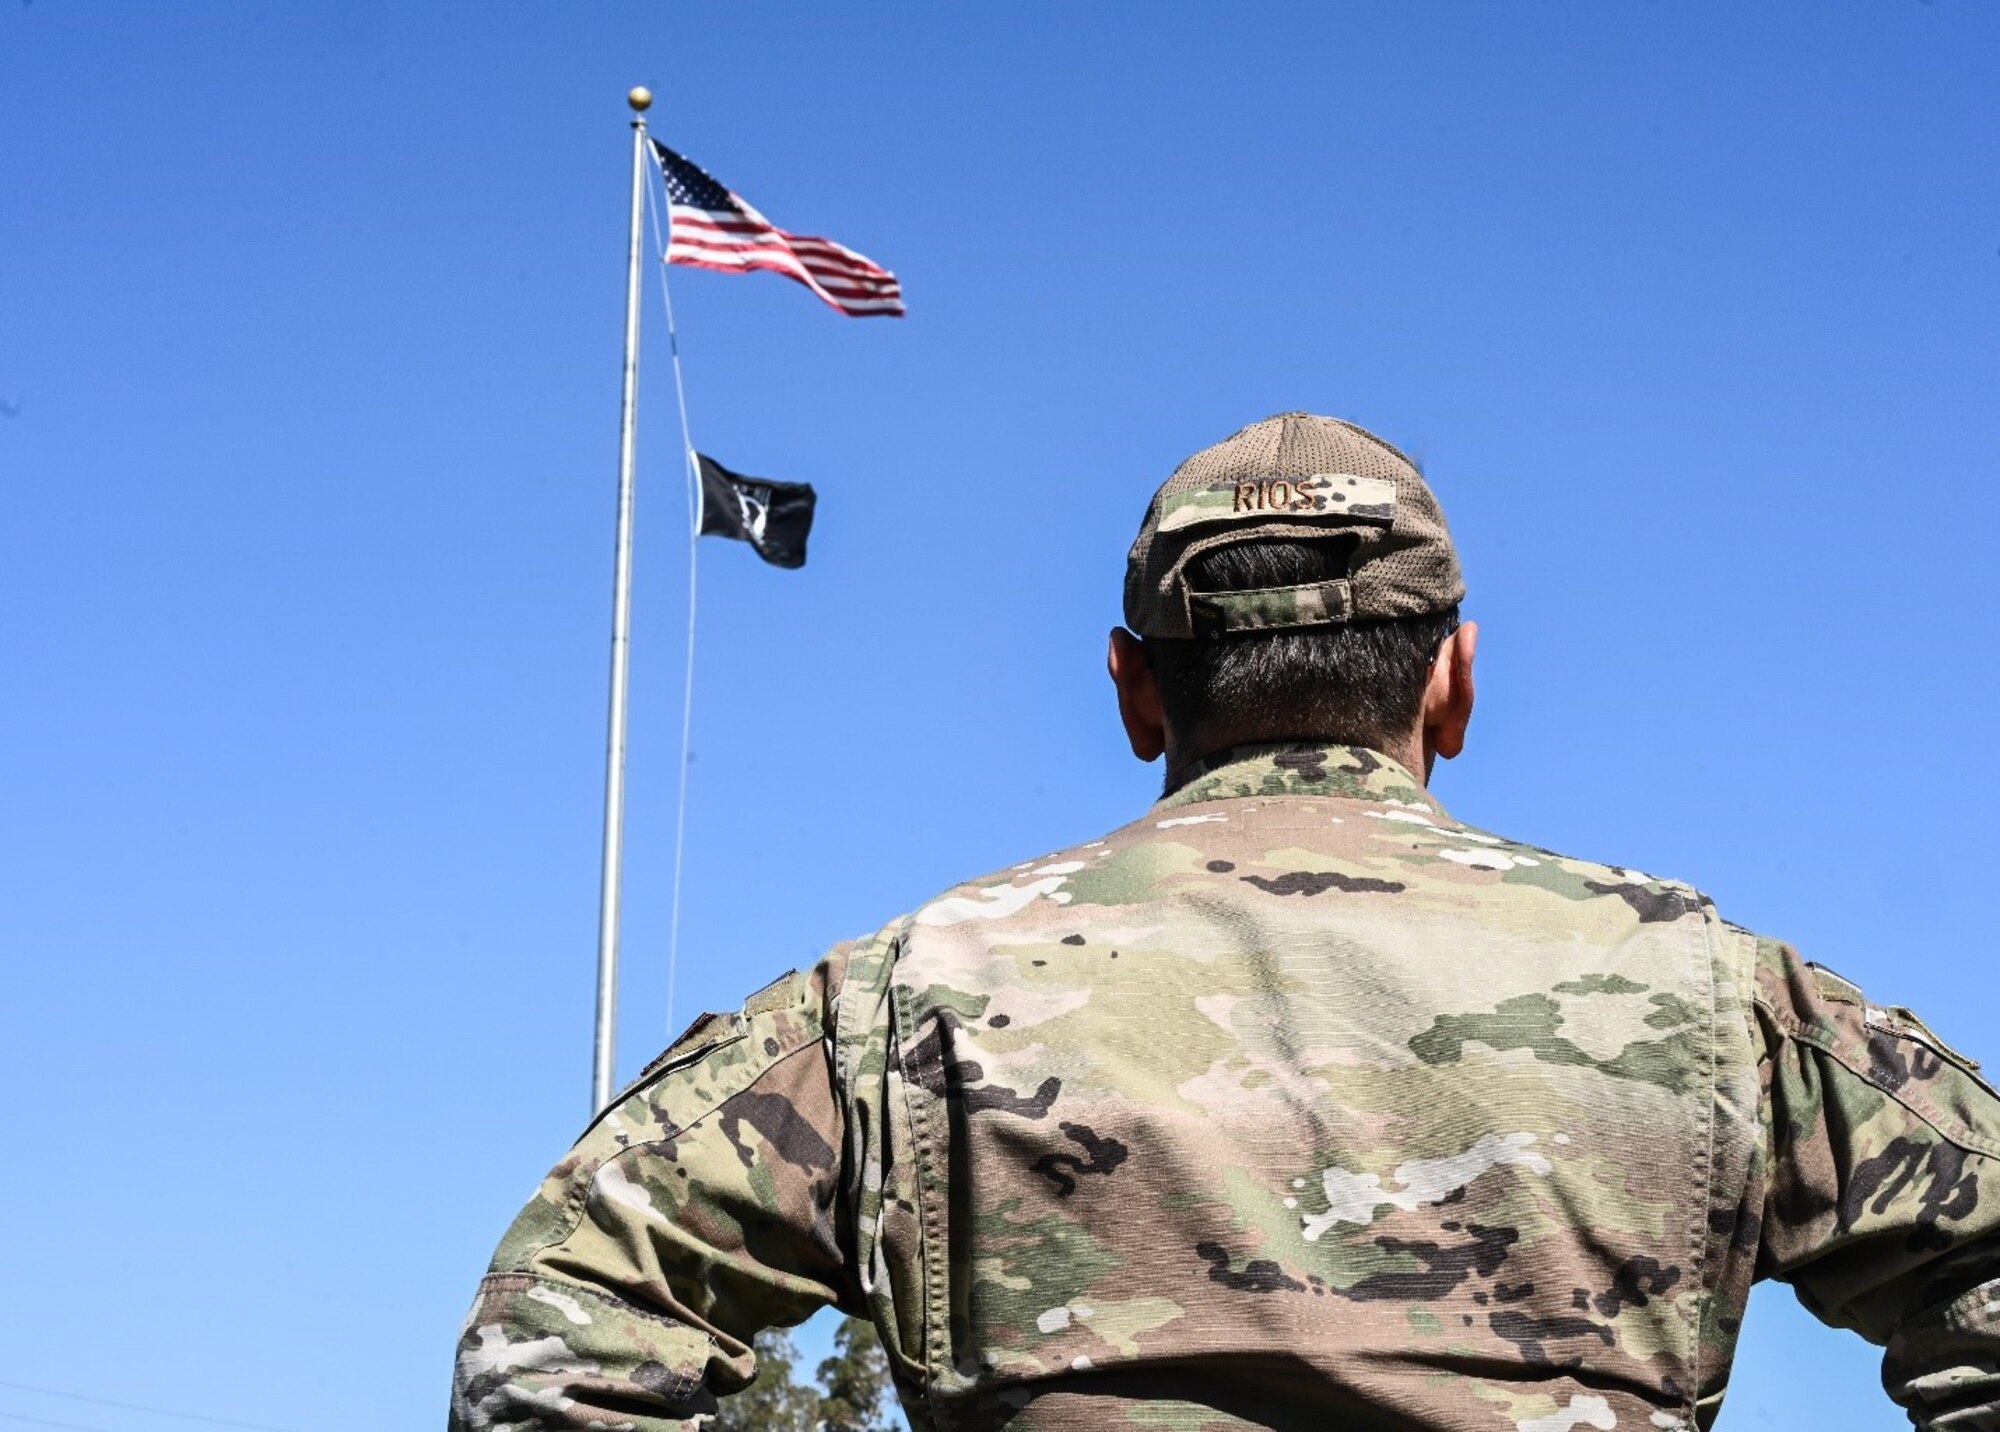 A uniformed Airman looks up at a flag pole bearing the U.S. and POW/MIA flags